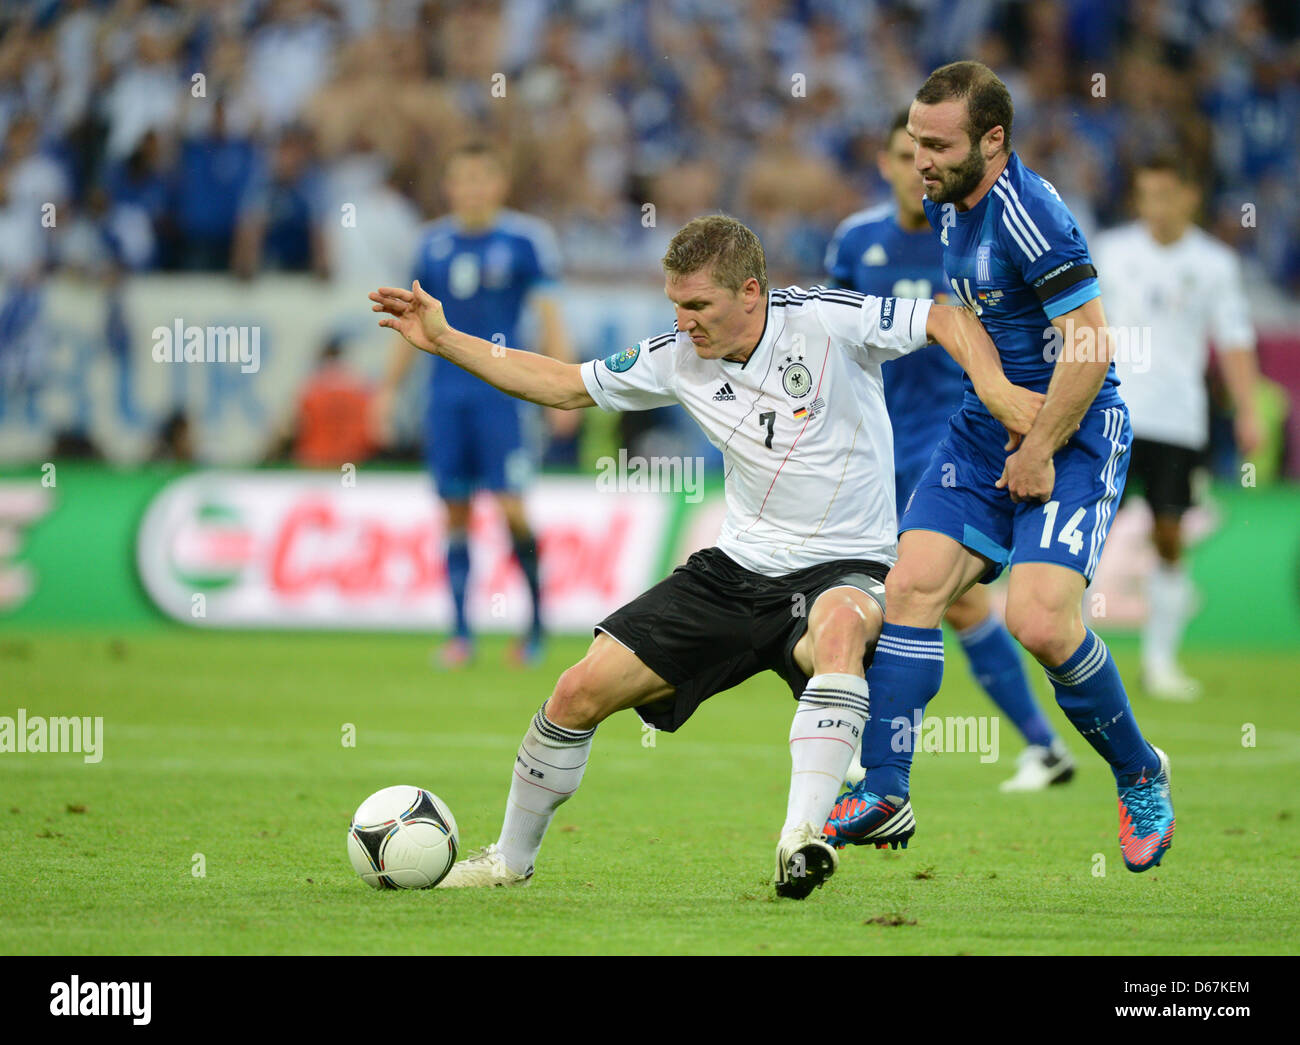 Germany's Bastian Schweinsteiger (L) and Greece's Dimitris Salpingidis vie for the ball during UEFA EURO 2012 quarter-final soccer match Germany vs Greece at Arena Gdansk in Gdansk, Poland, 22 June 2012. Photo: Andreas Gebert dpa (Please refer to chapters 7 and 8 of http://dpaq.de/Ziovh for UEFA Euro 2012 Terms & Conditions)  +++(c) dpa - Bildfunk+++ Stock Photo